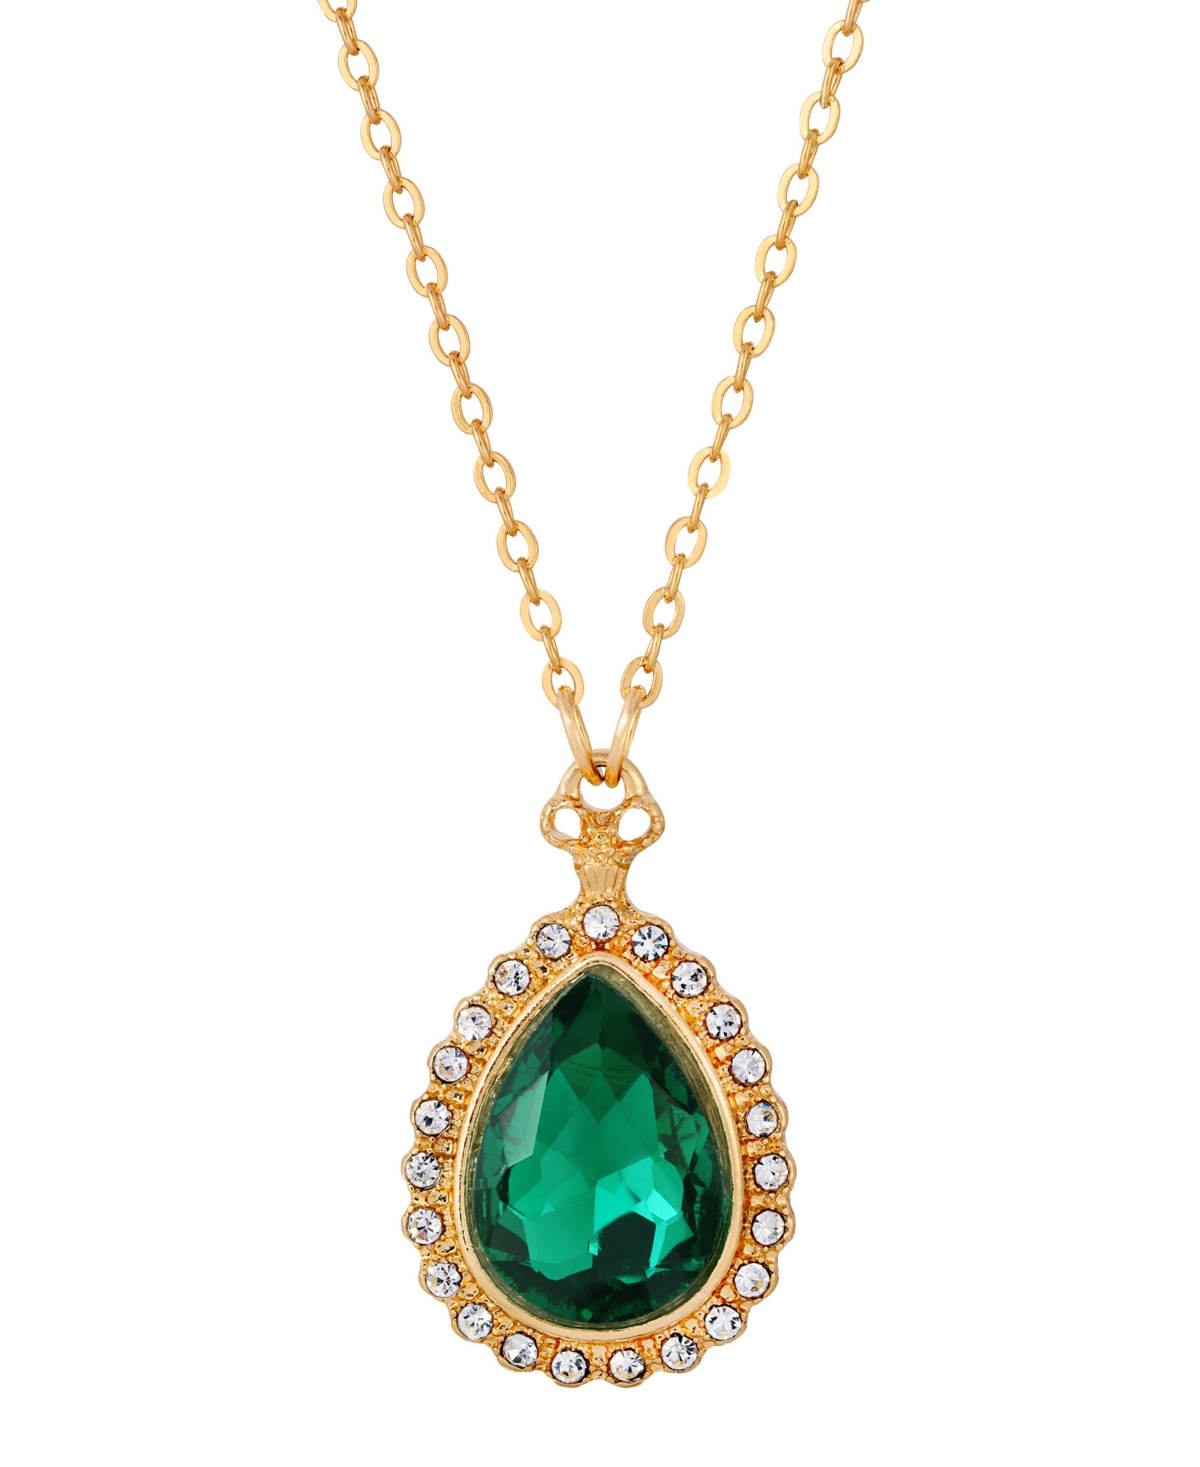 Victorian Jewelry Rings, Earrings, Necklaces, Hair Jewelry 2028 Teardrop Necklace - Green $21.00 AT vintagedancer.com